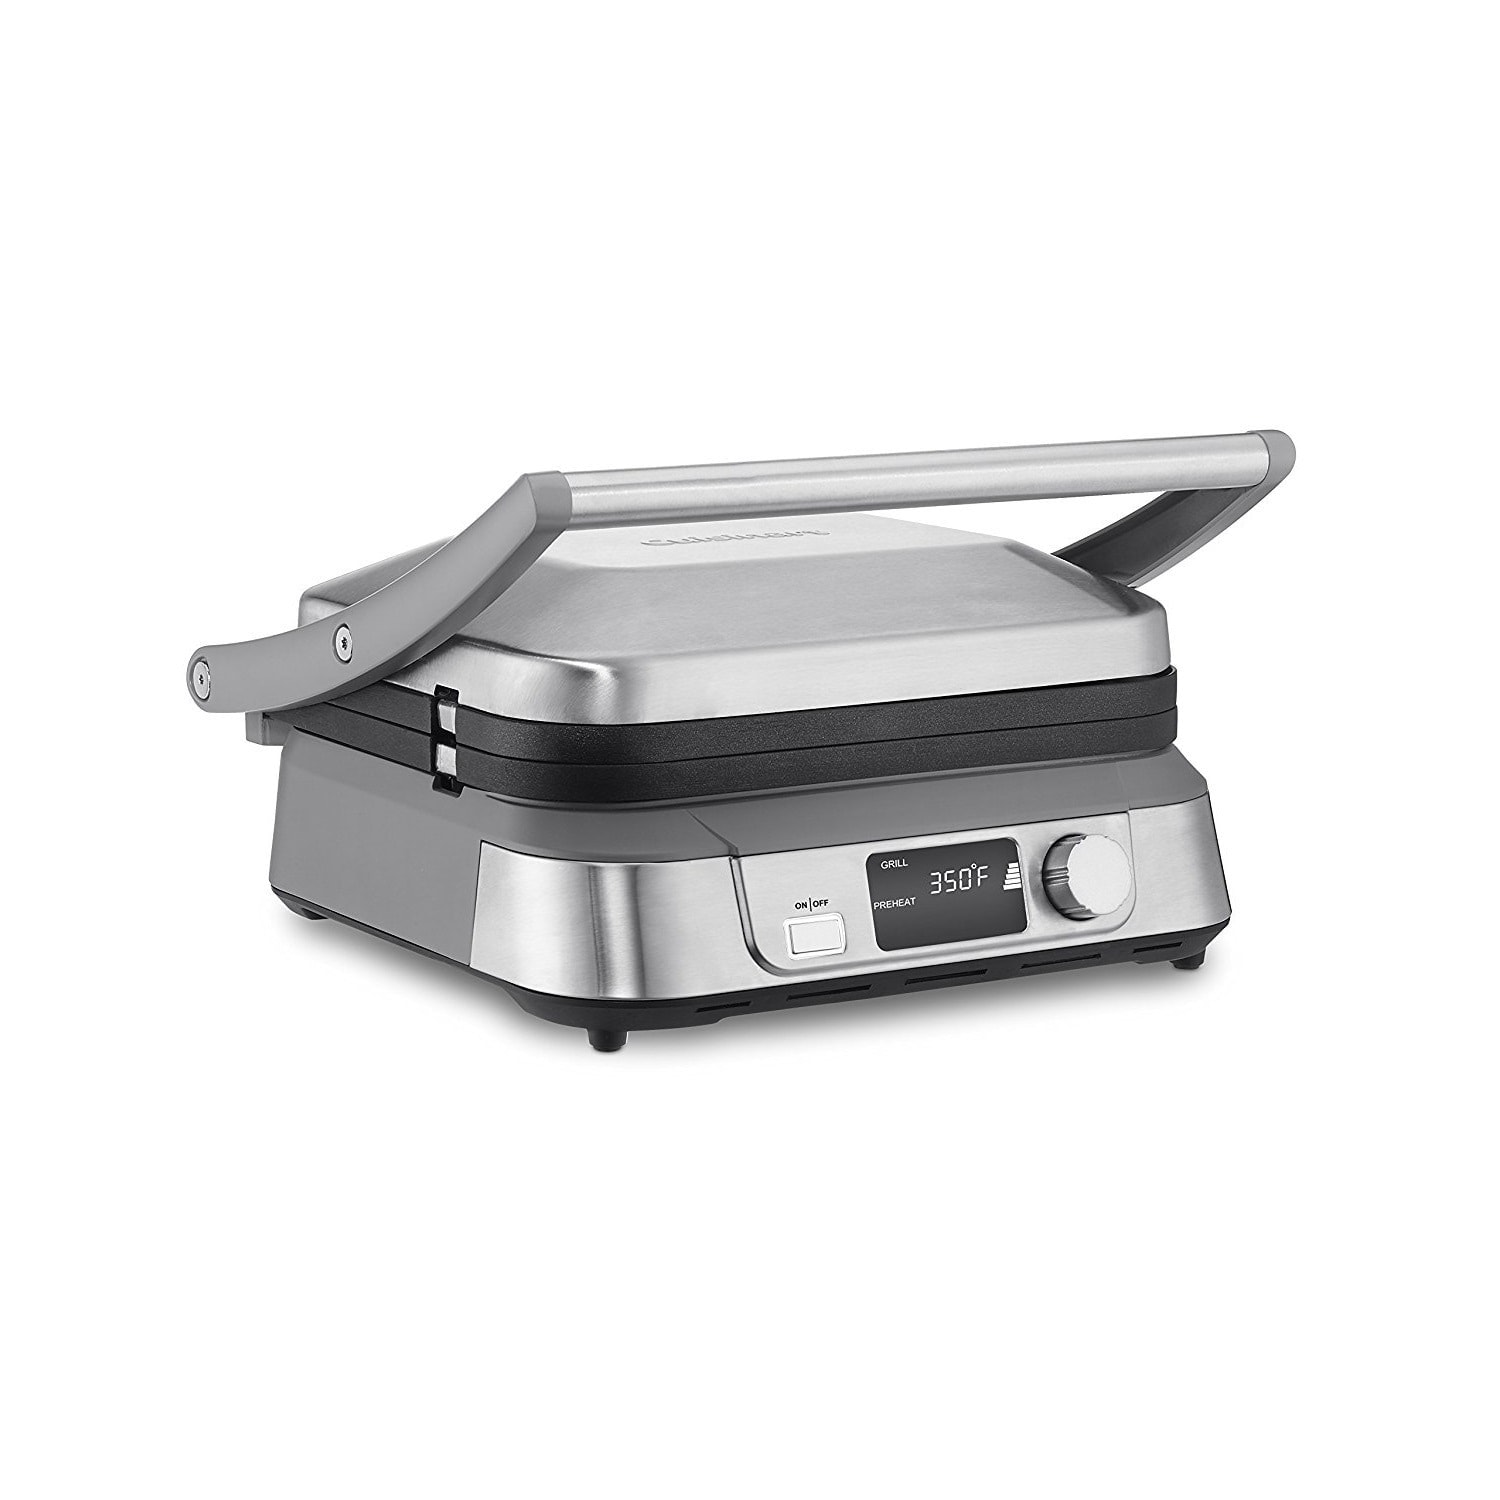 Cuisinart CSK-150 Electric Skillet 12 x 15 Oval Cooking Surface 1500 Watts